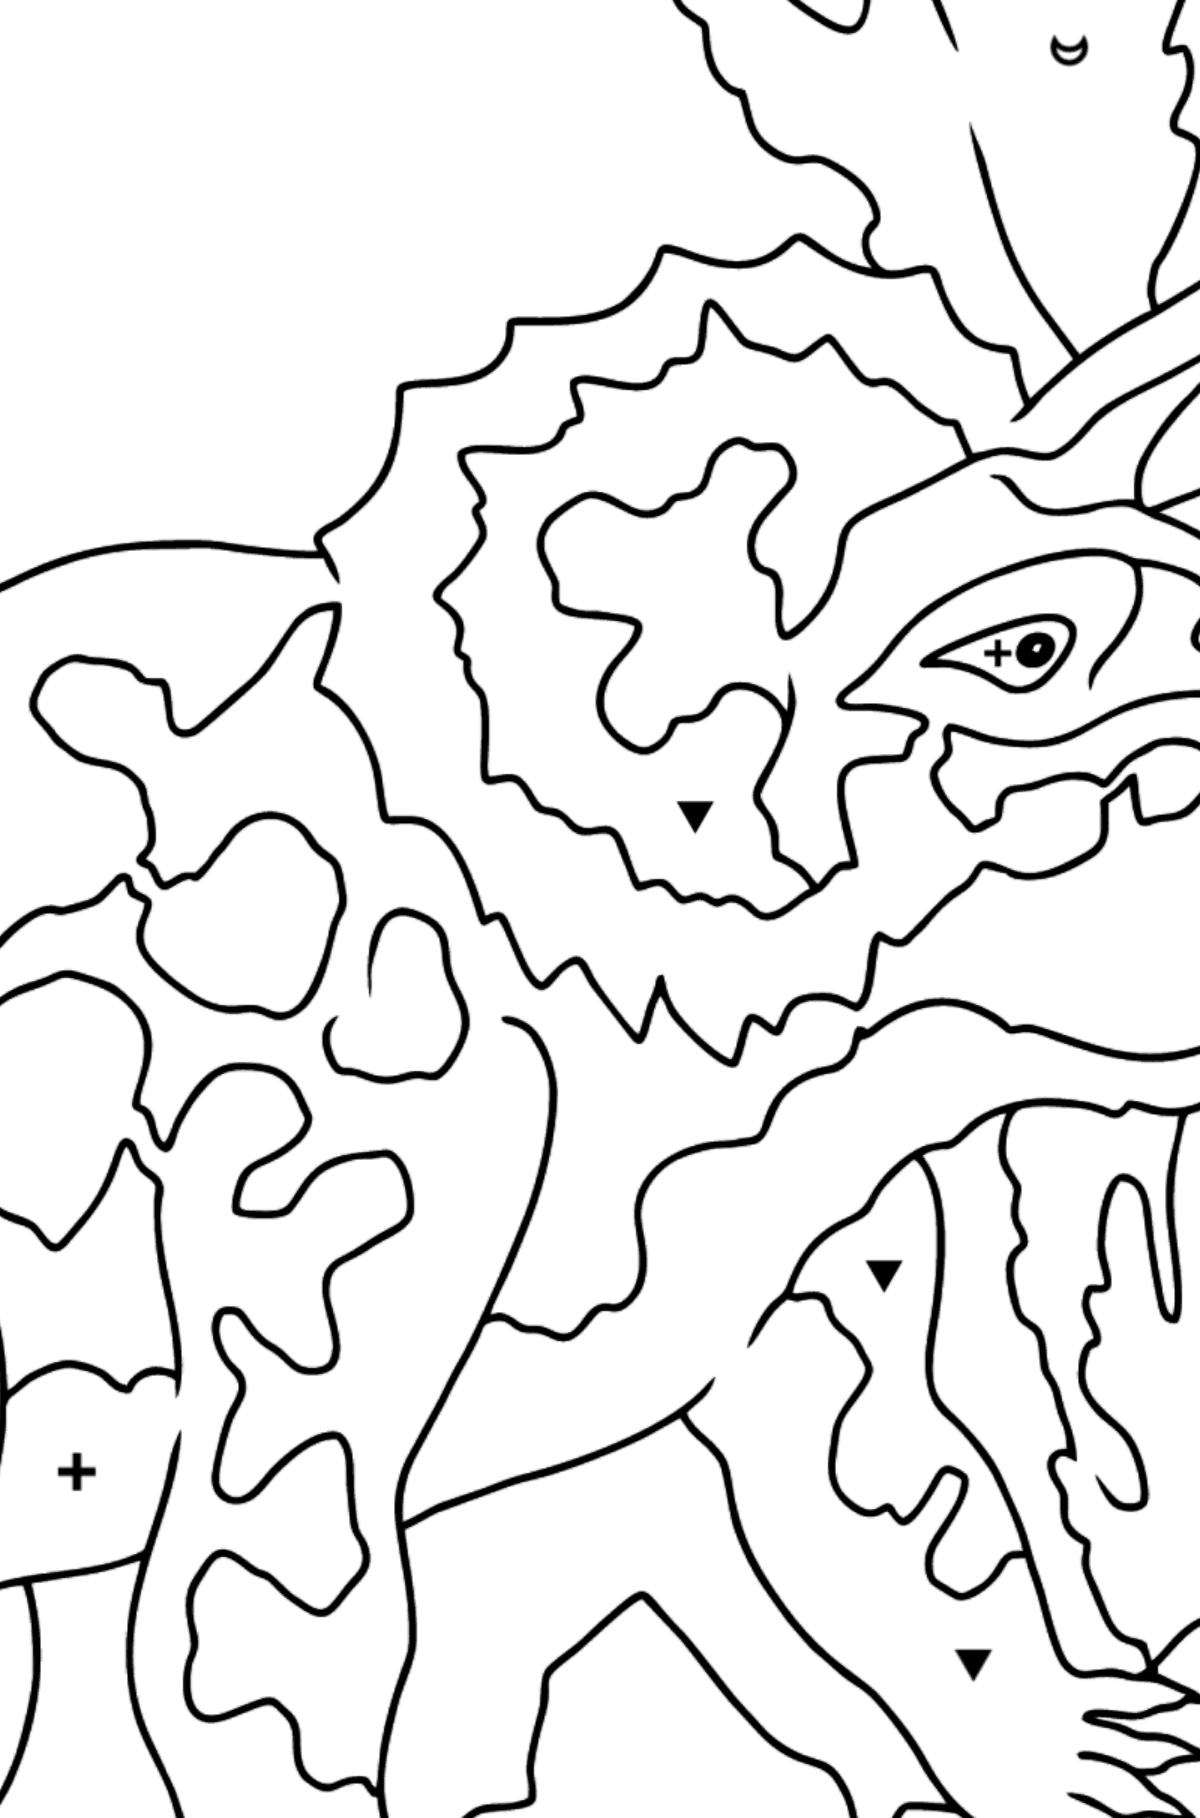 Triceratops Coloring Page - Coloring by Symbols for Kids